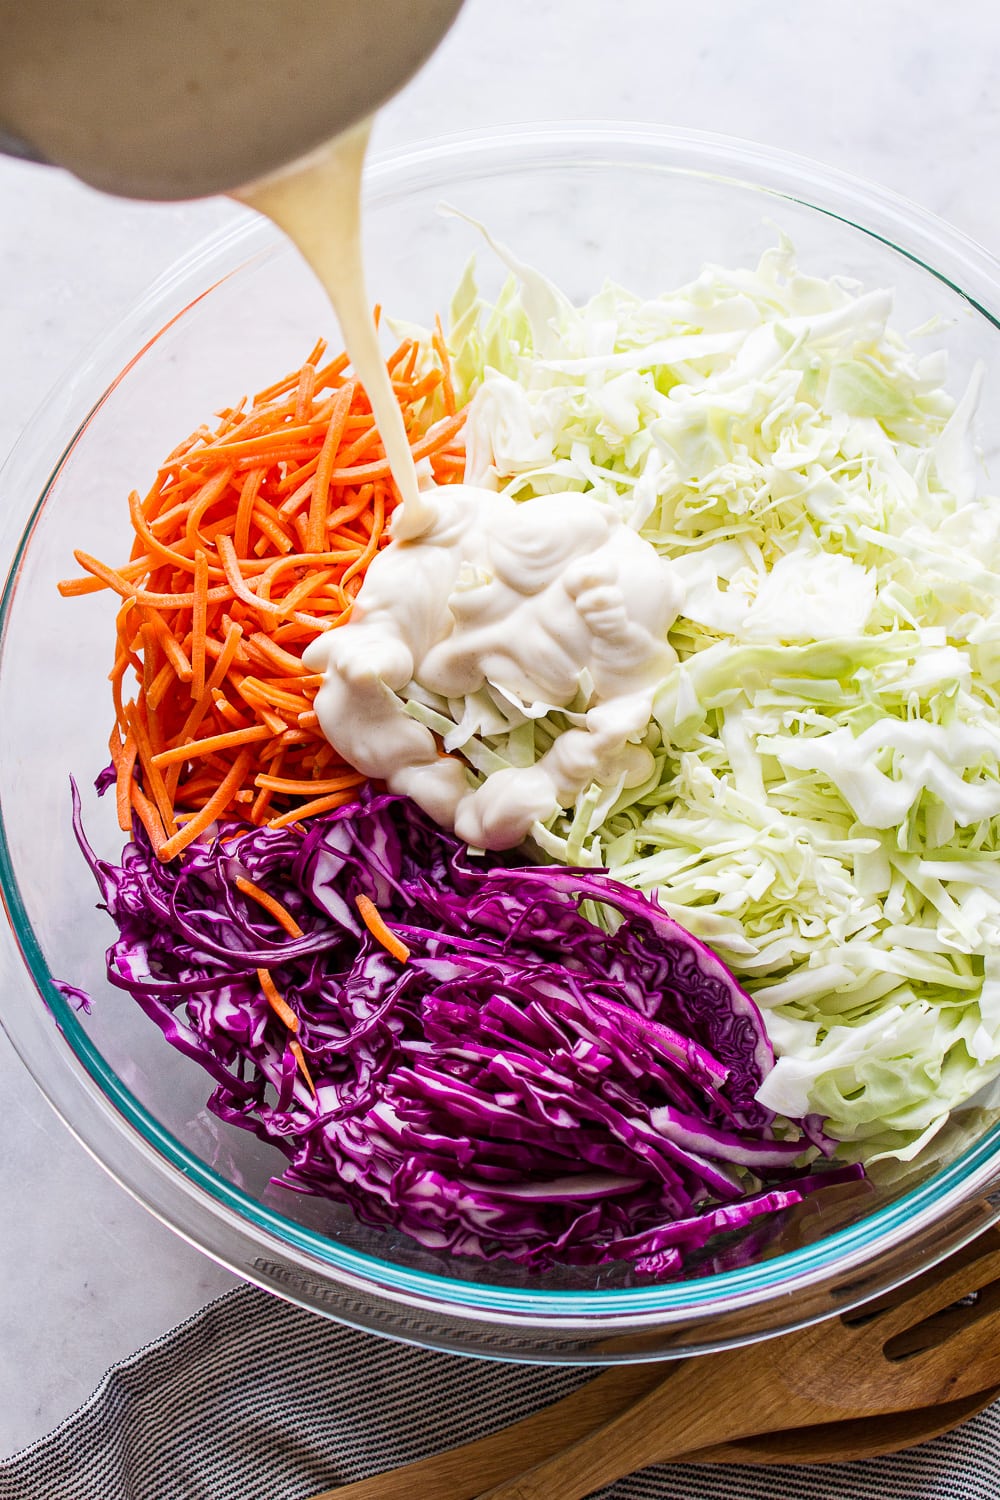 top down view of coleslaw dressing being poured over cabbage and carrots in a large glass mixing bowl.